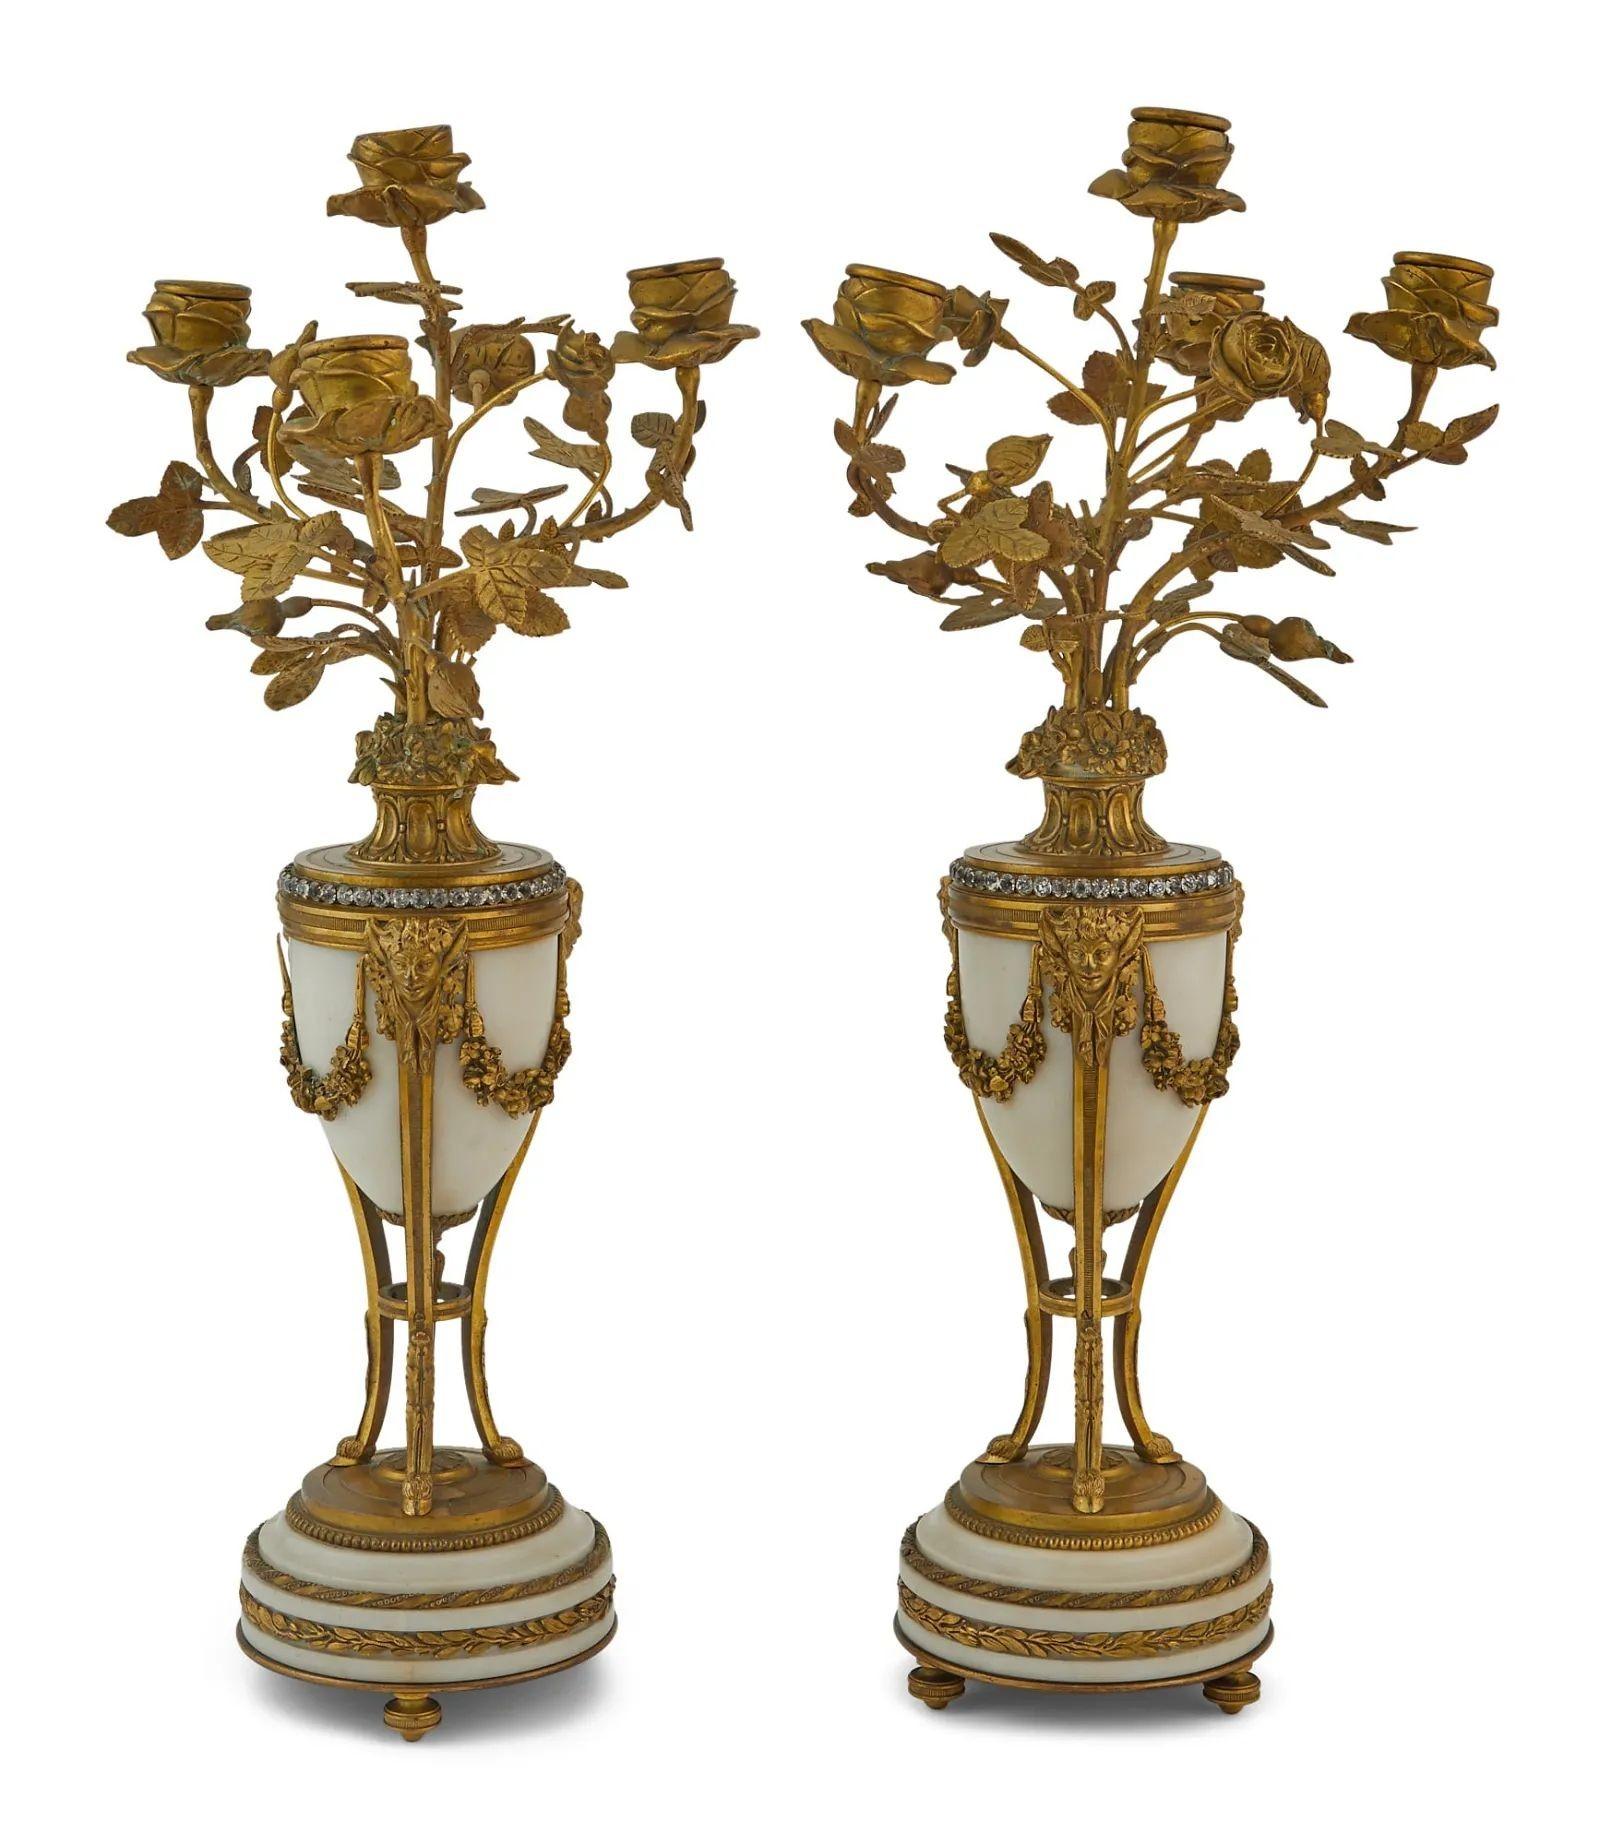 Tiffany French Louis XVI Clock Garniture Set, Bronze, Marble, 19th/20th Century
A French Louis XVI style three-piece gilt bronze and white marble clock garniture, retailed by Tiffany & Co., New York, NY, late 19th century


Comprising a clock, of